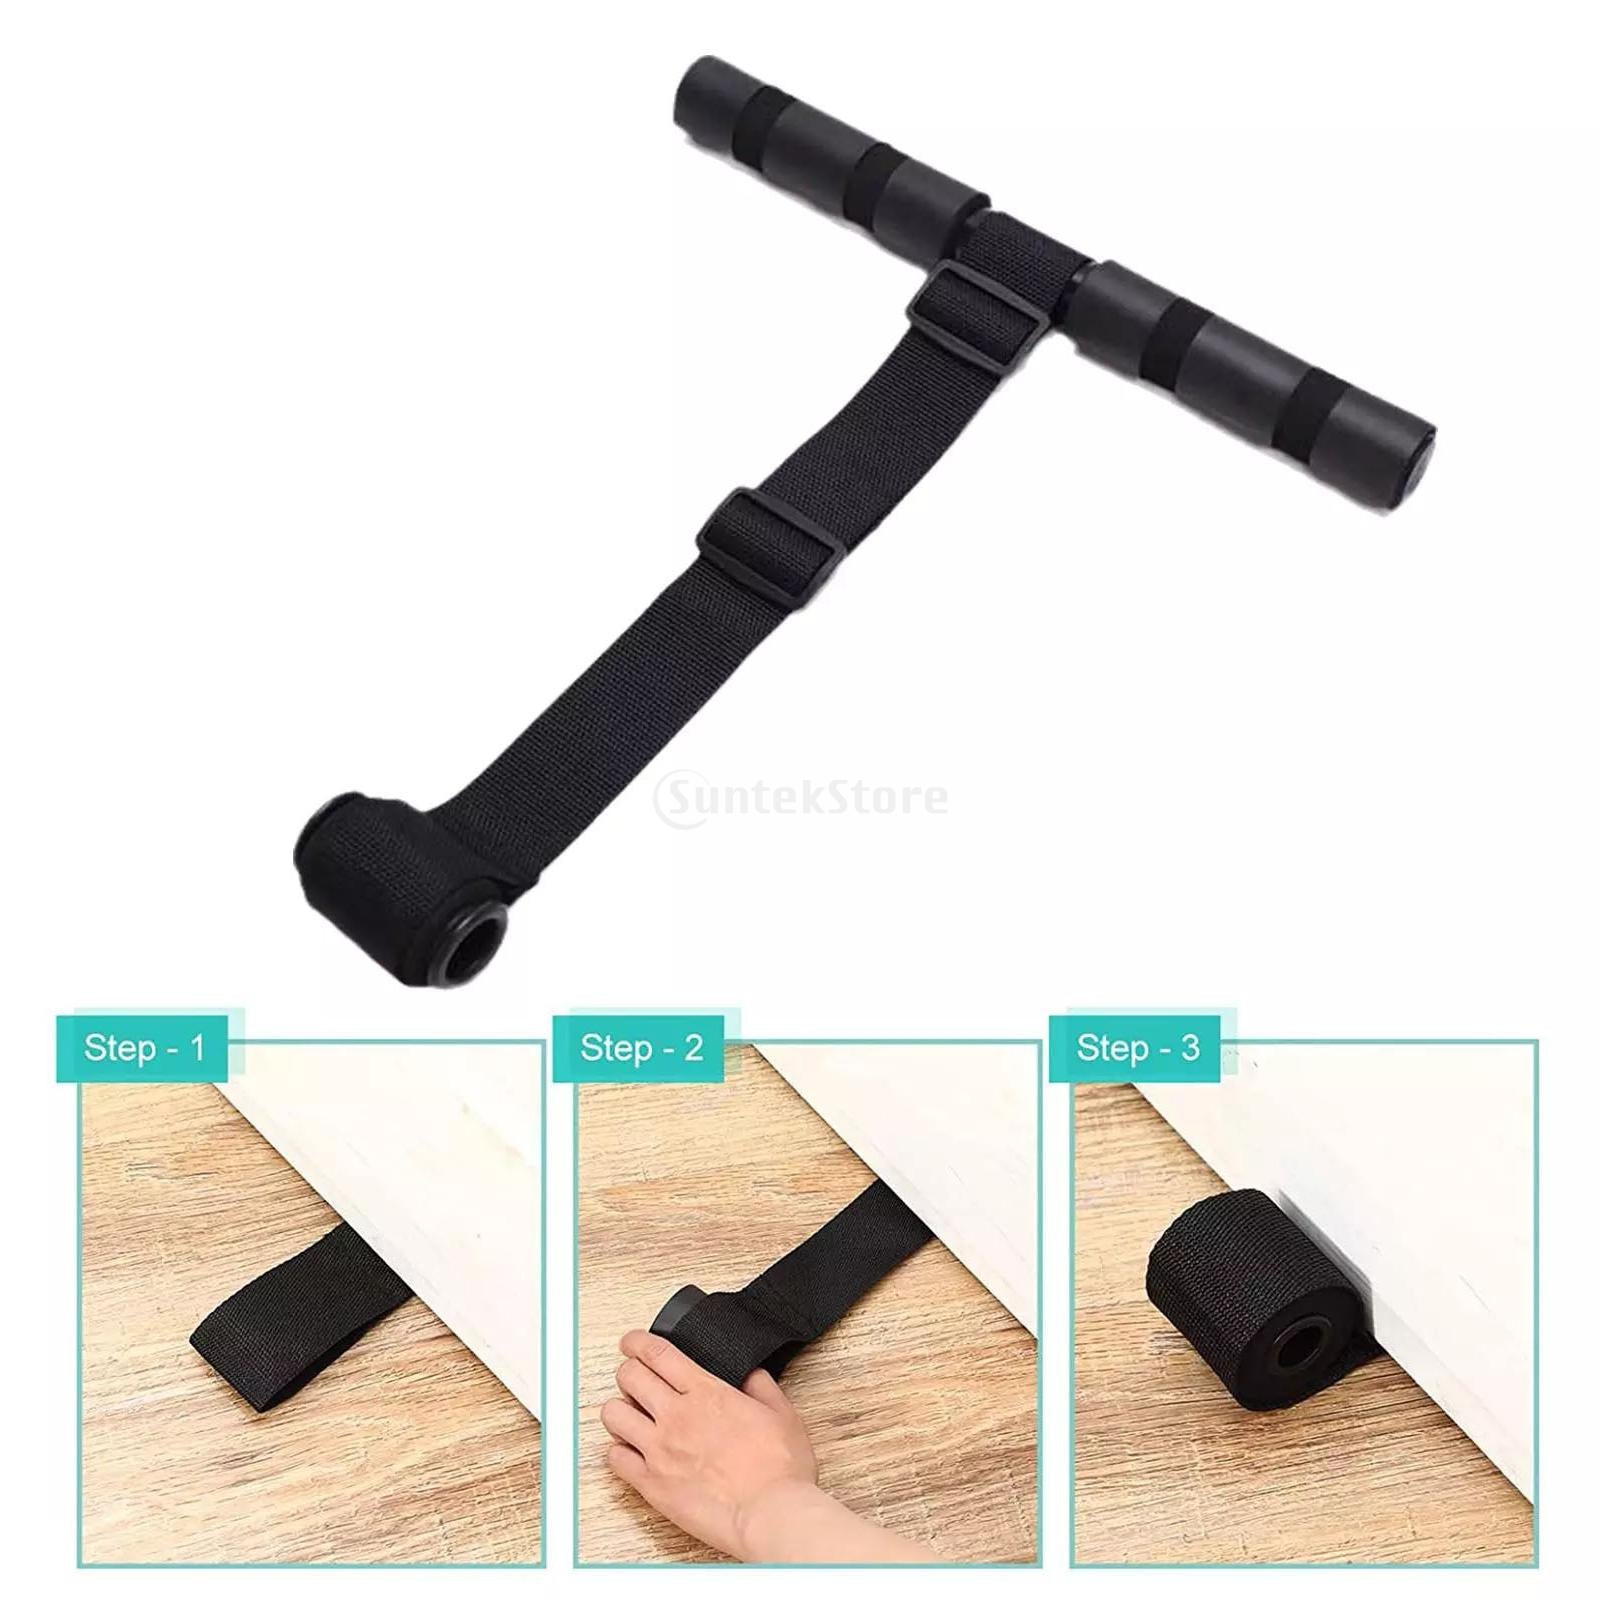 Curl Strap Exercise Curl Ab Leg Equipment - Door Anchor Abdominal Sit Up Assistant Bar for Strength Training